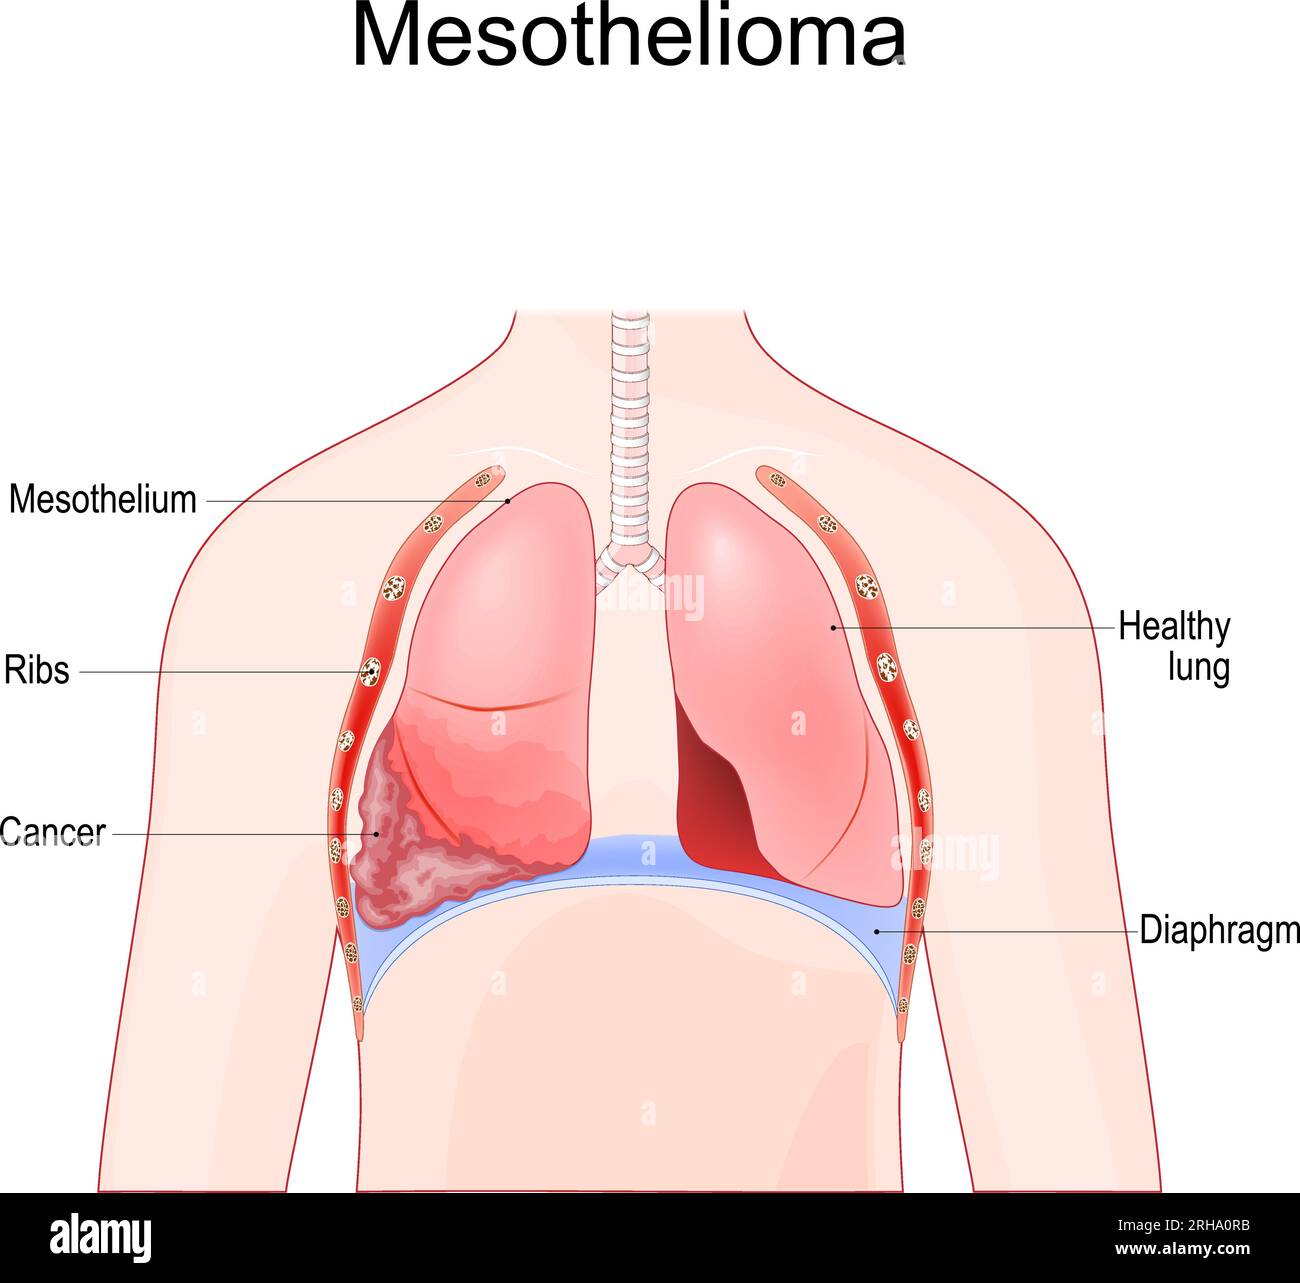 mesothelioma. Malignant tumor of lung after Asbestos exposure. Vector illustration Stock Vector